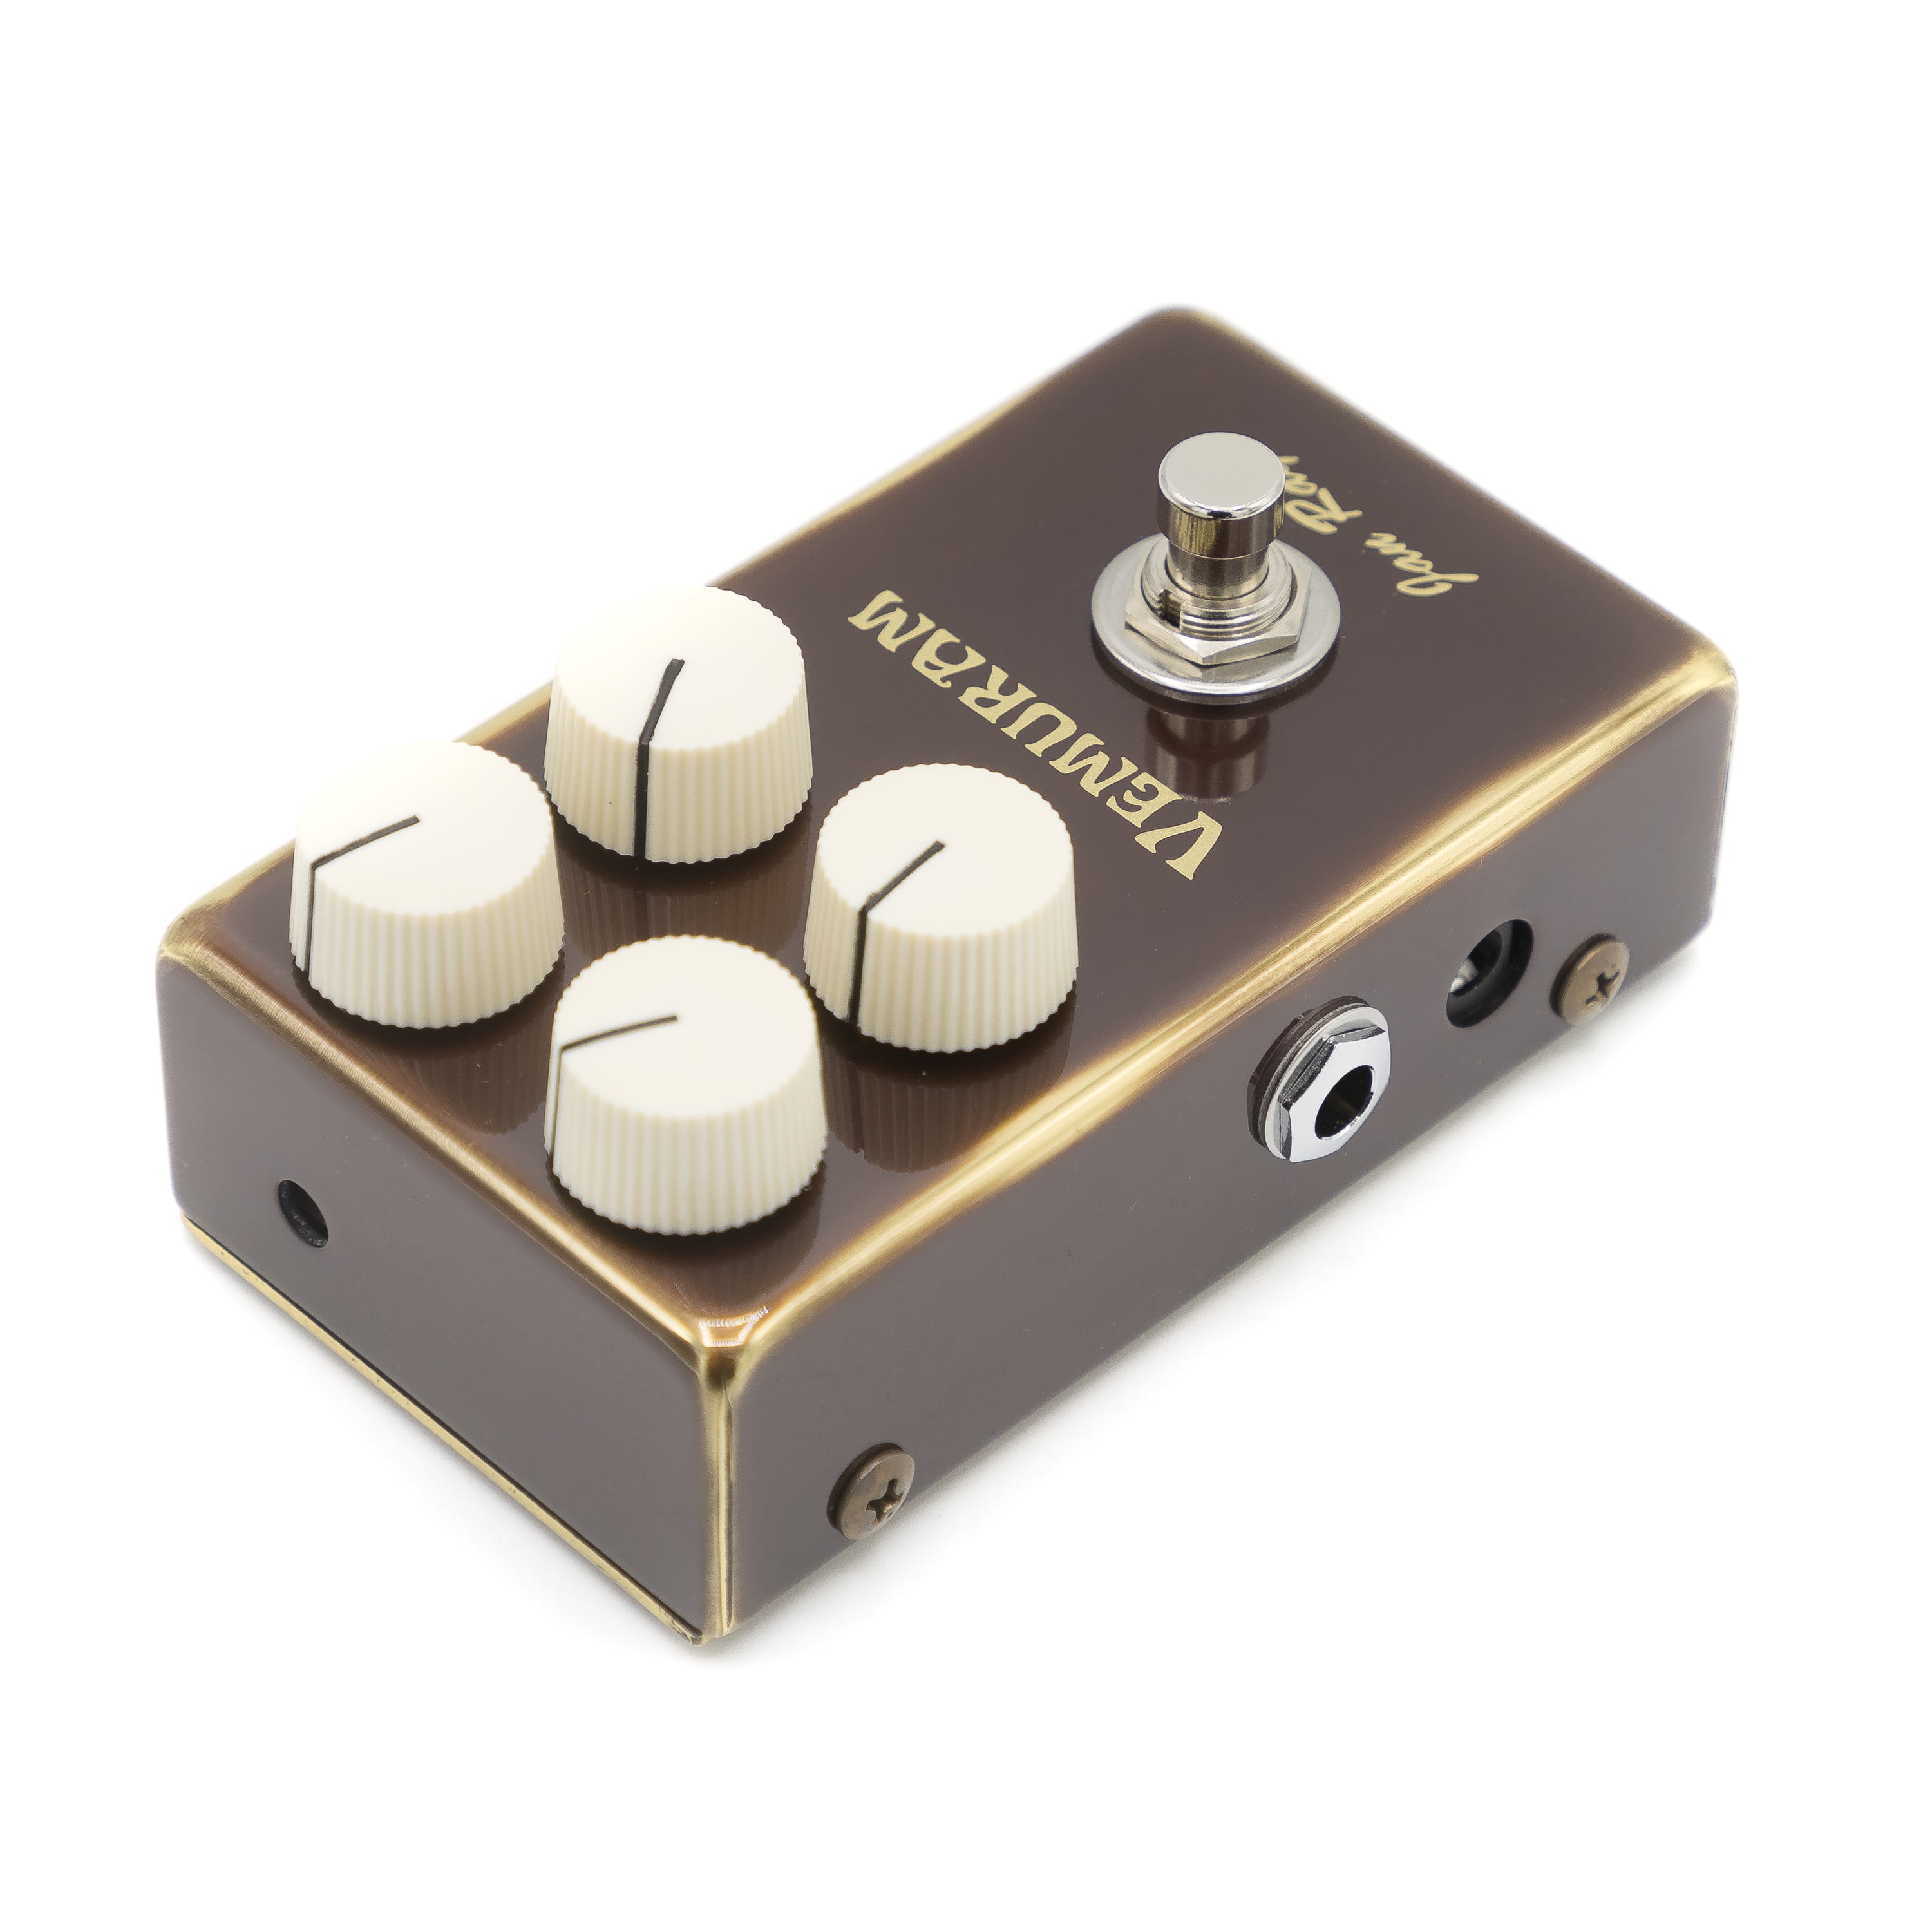 Vemuram Pedals - Jan Ray - Boost-Overdrive